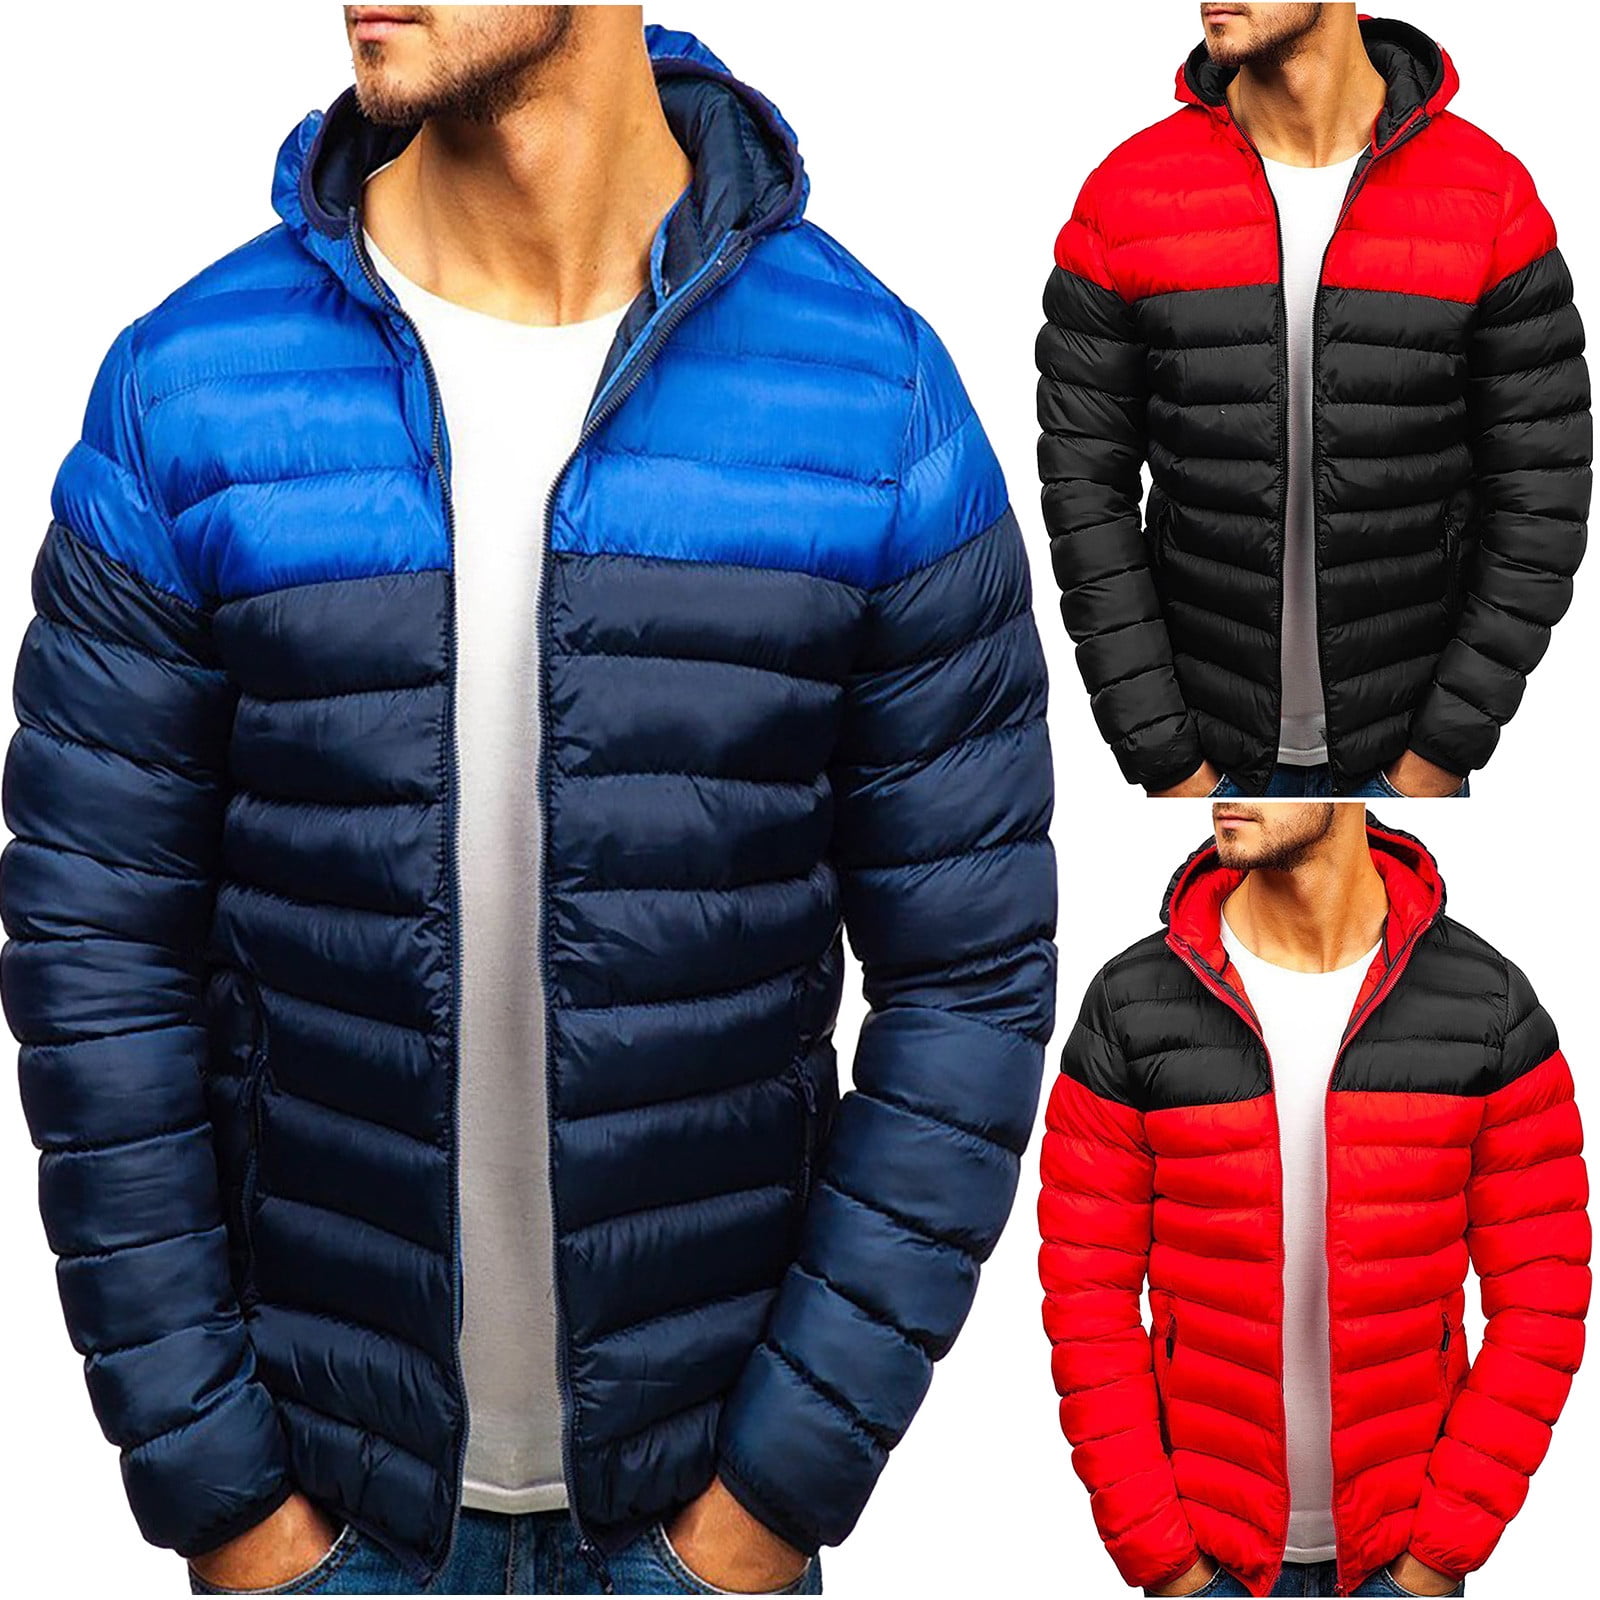 Mens Winter Coat with Hoodie.Mens Winter Medium Length Zipper Pure Color Hoodie Thickened Cotton Outwear Coat